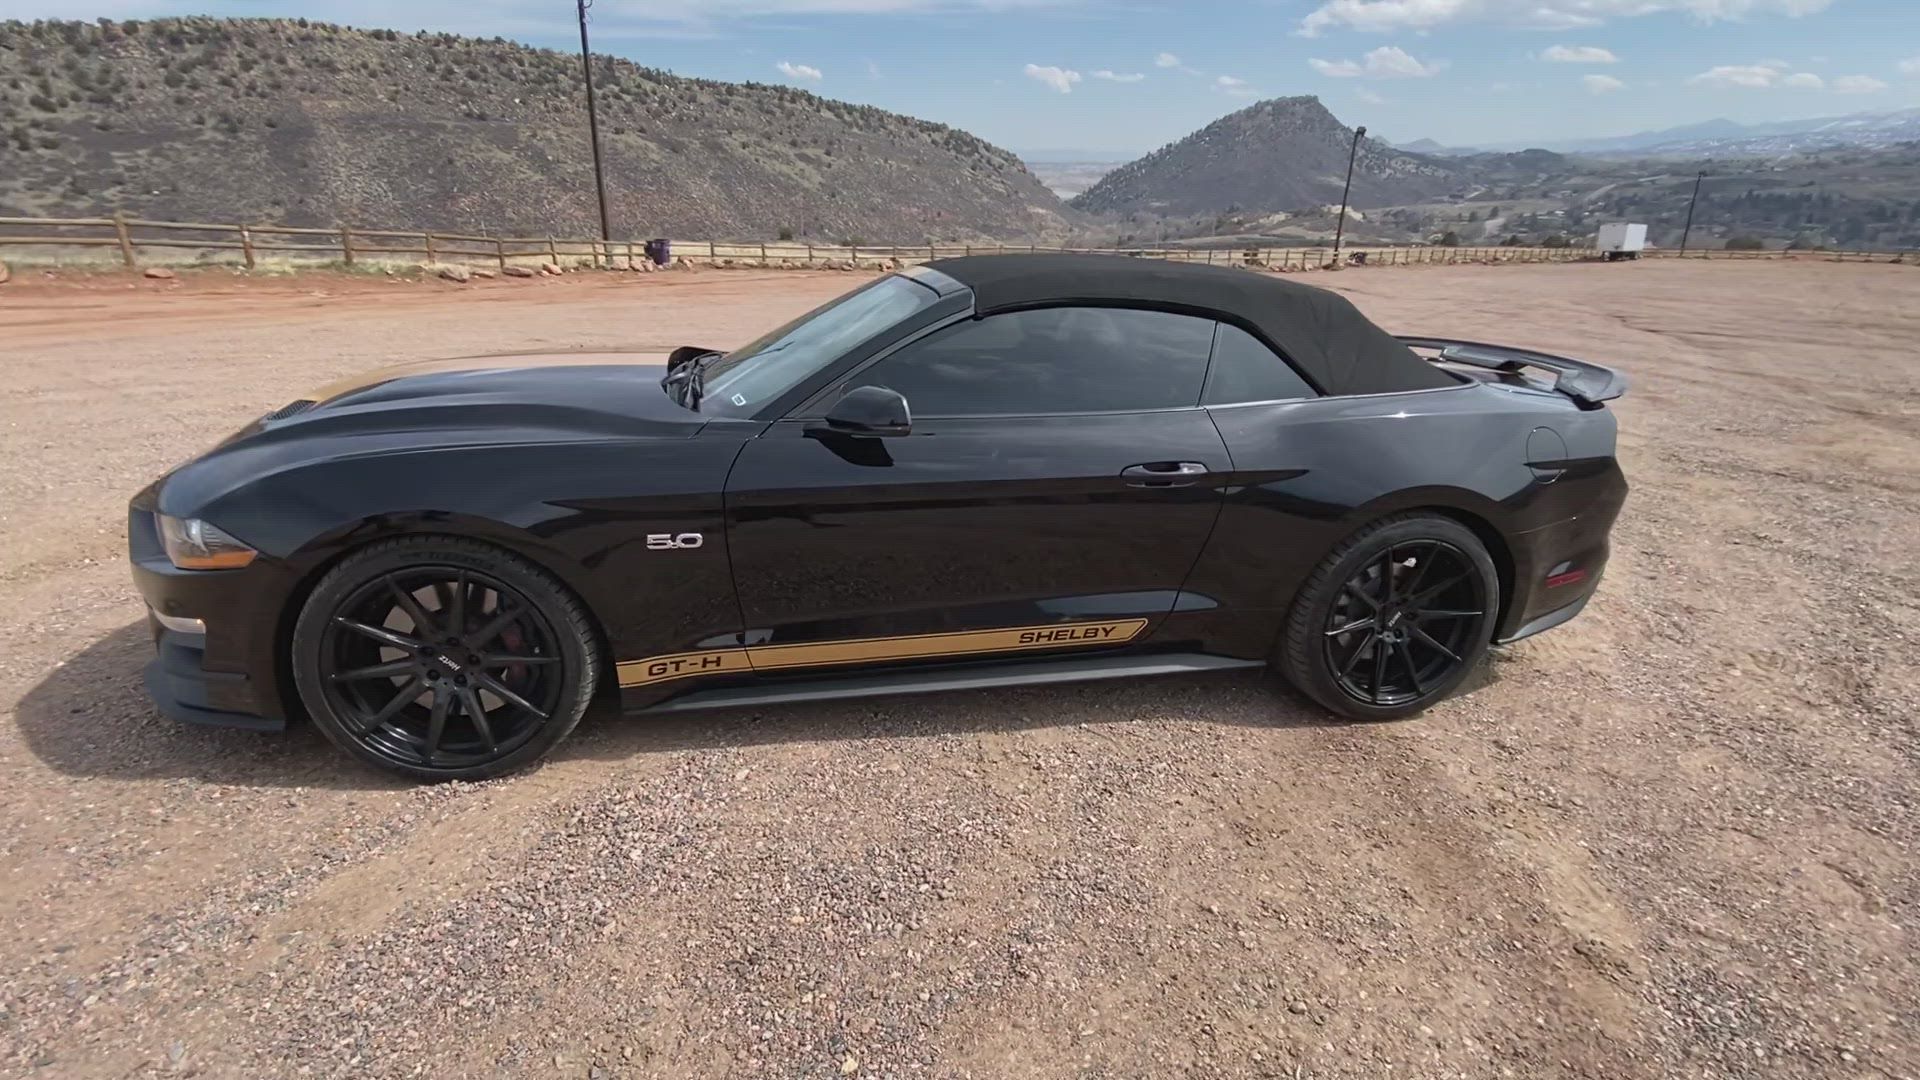 Supercharged 2022 Ford Mustang Shelby GT-H Convertible for sale on 